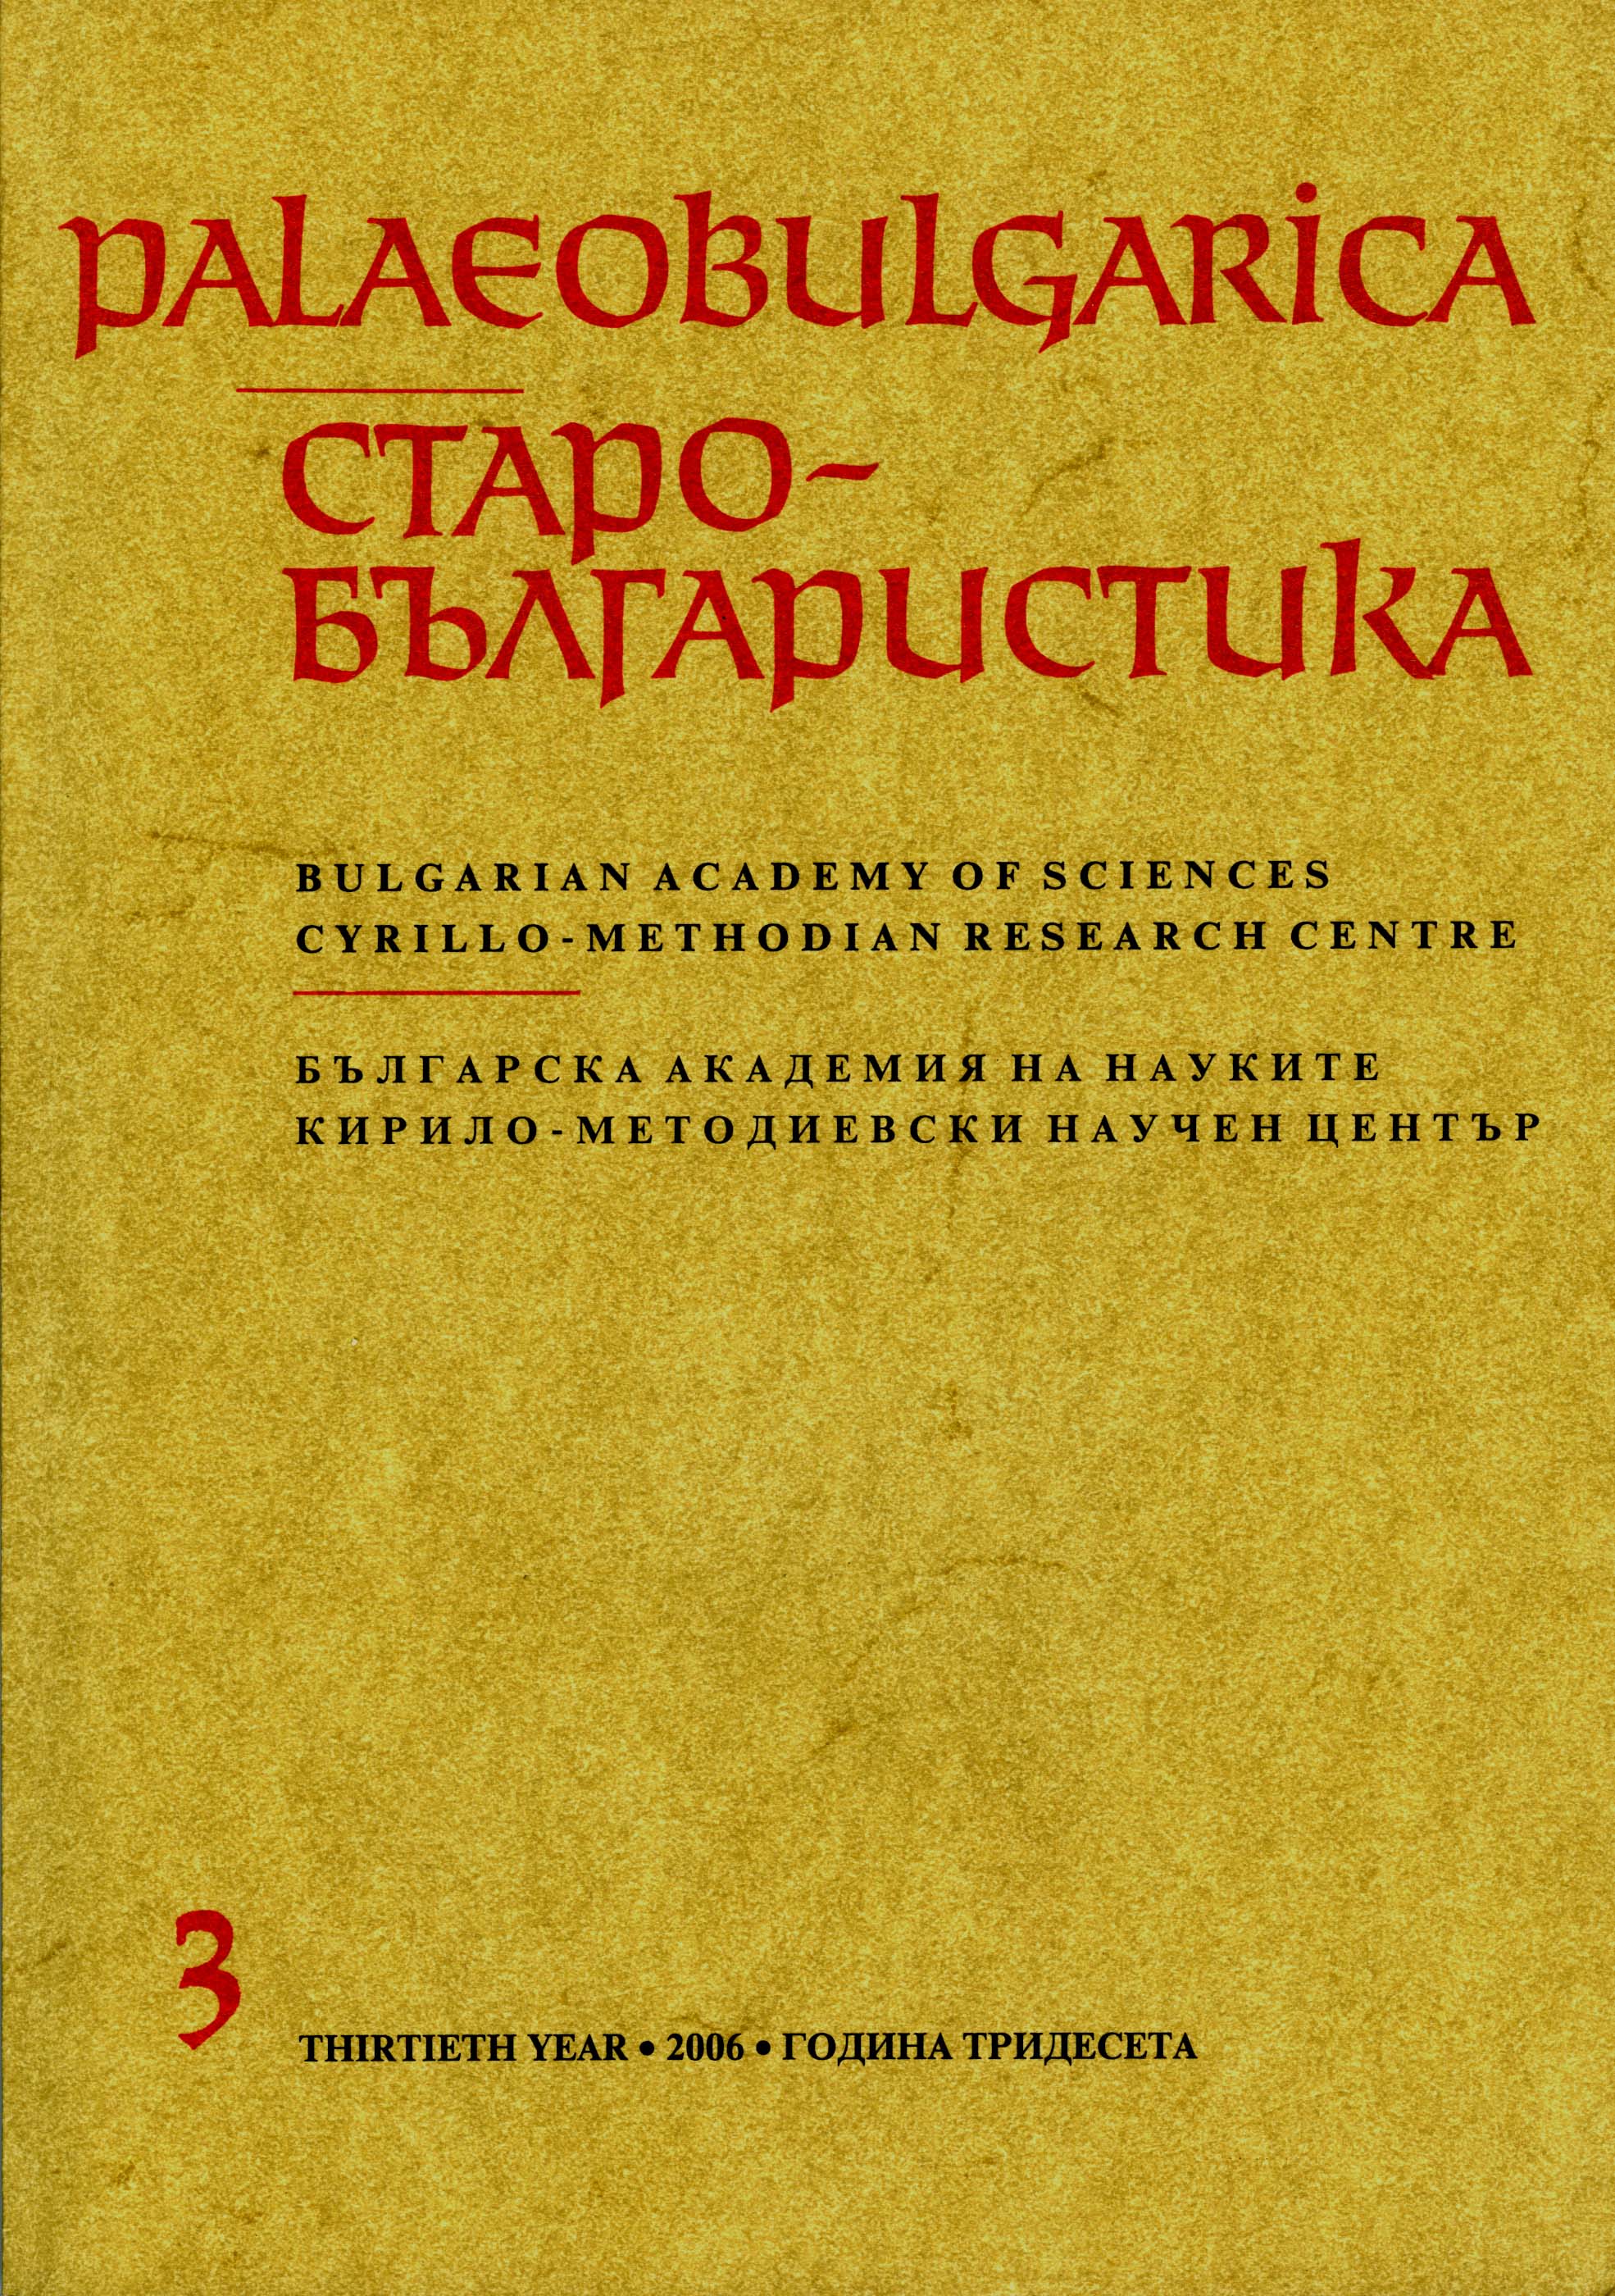 On the Translation of the Book on Early Medieval Notation by C. Floros with Special Emphasis on Its Importance for the Study of Early Bulgarian Orthodox Chant Cover Image